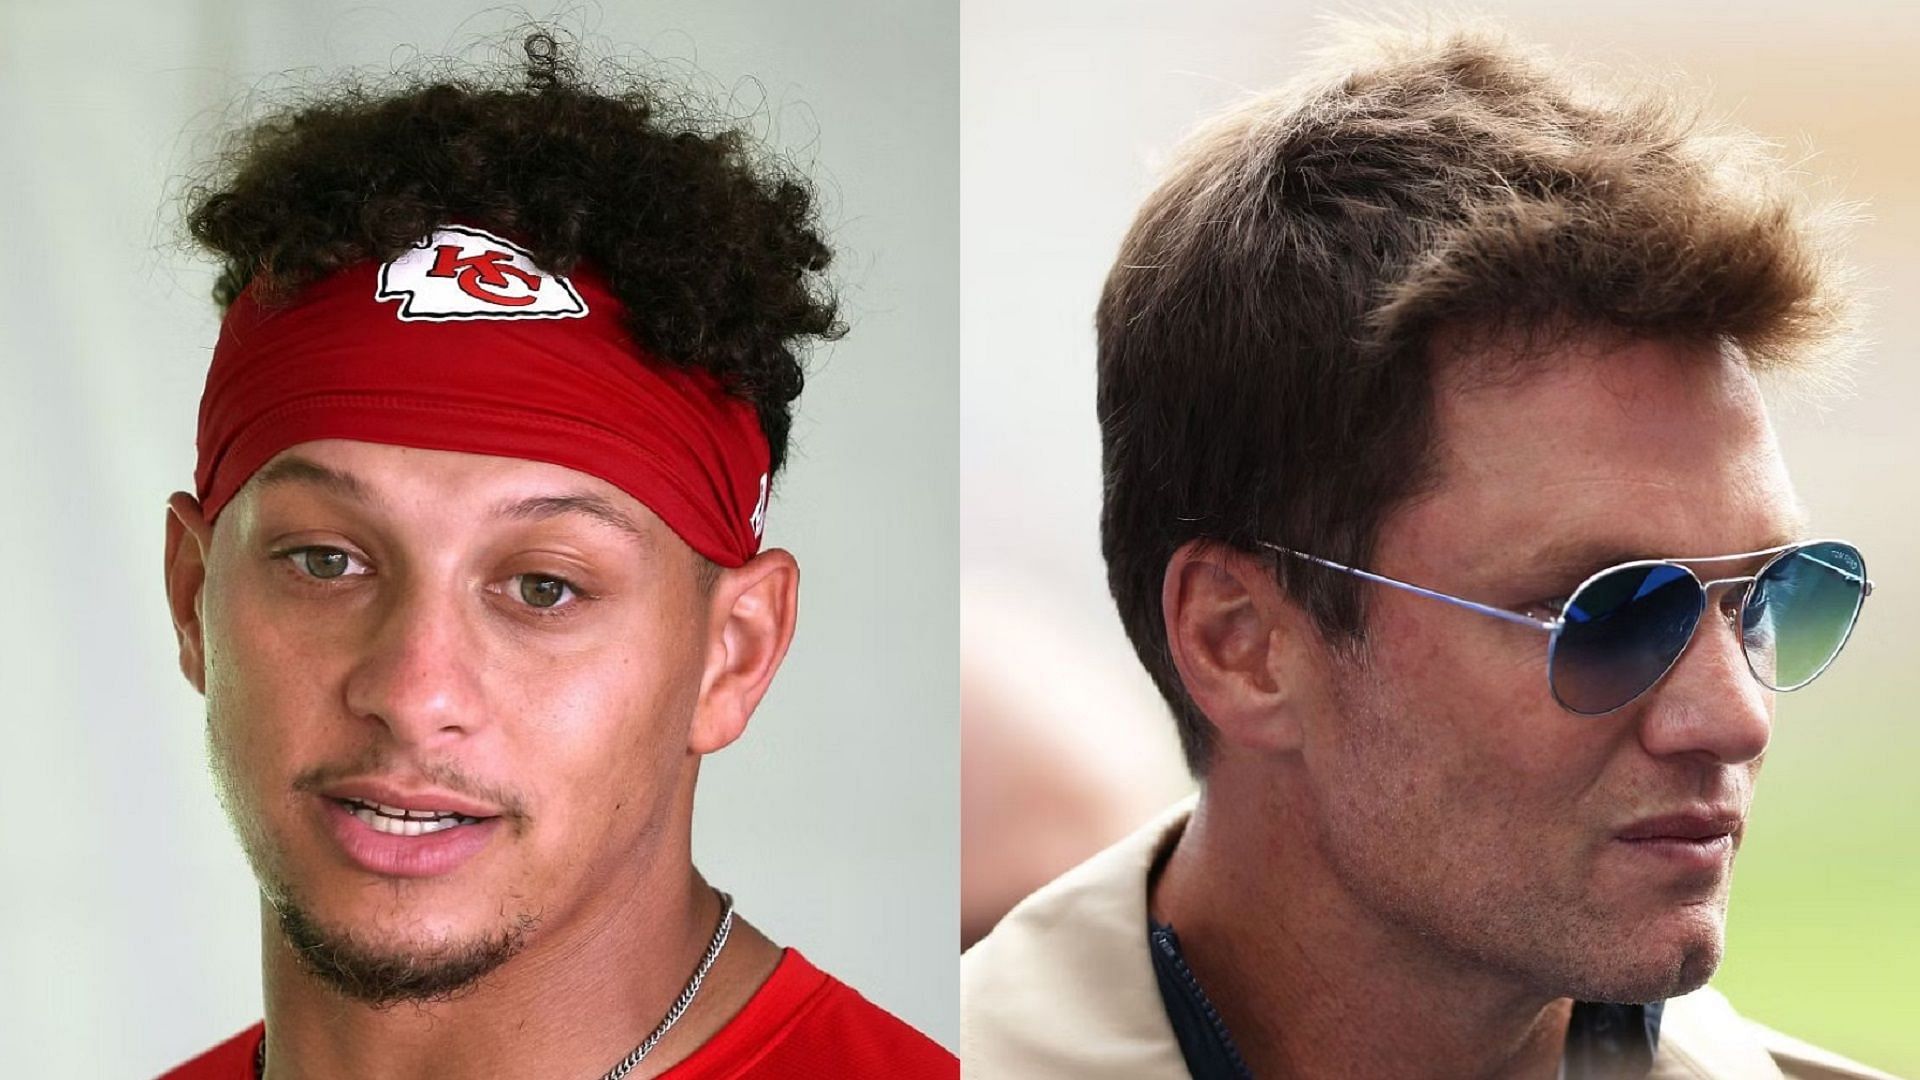 Patrick Mahomes gets slapped with ceiling lower than Tom Brady